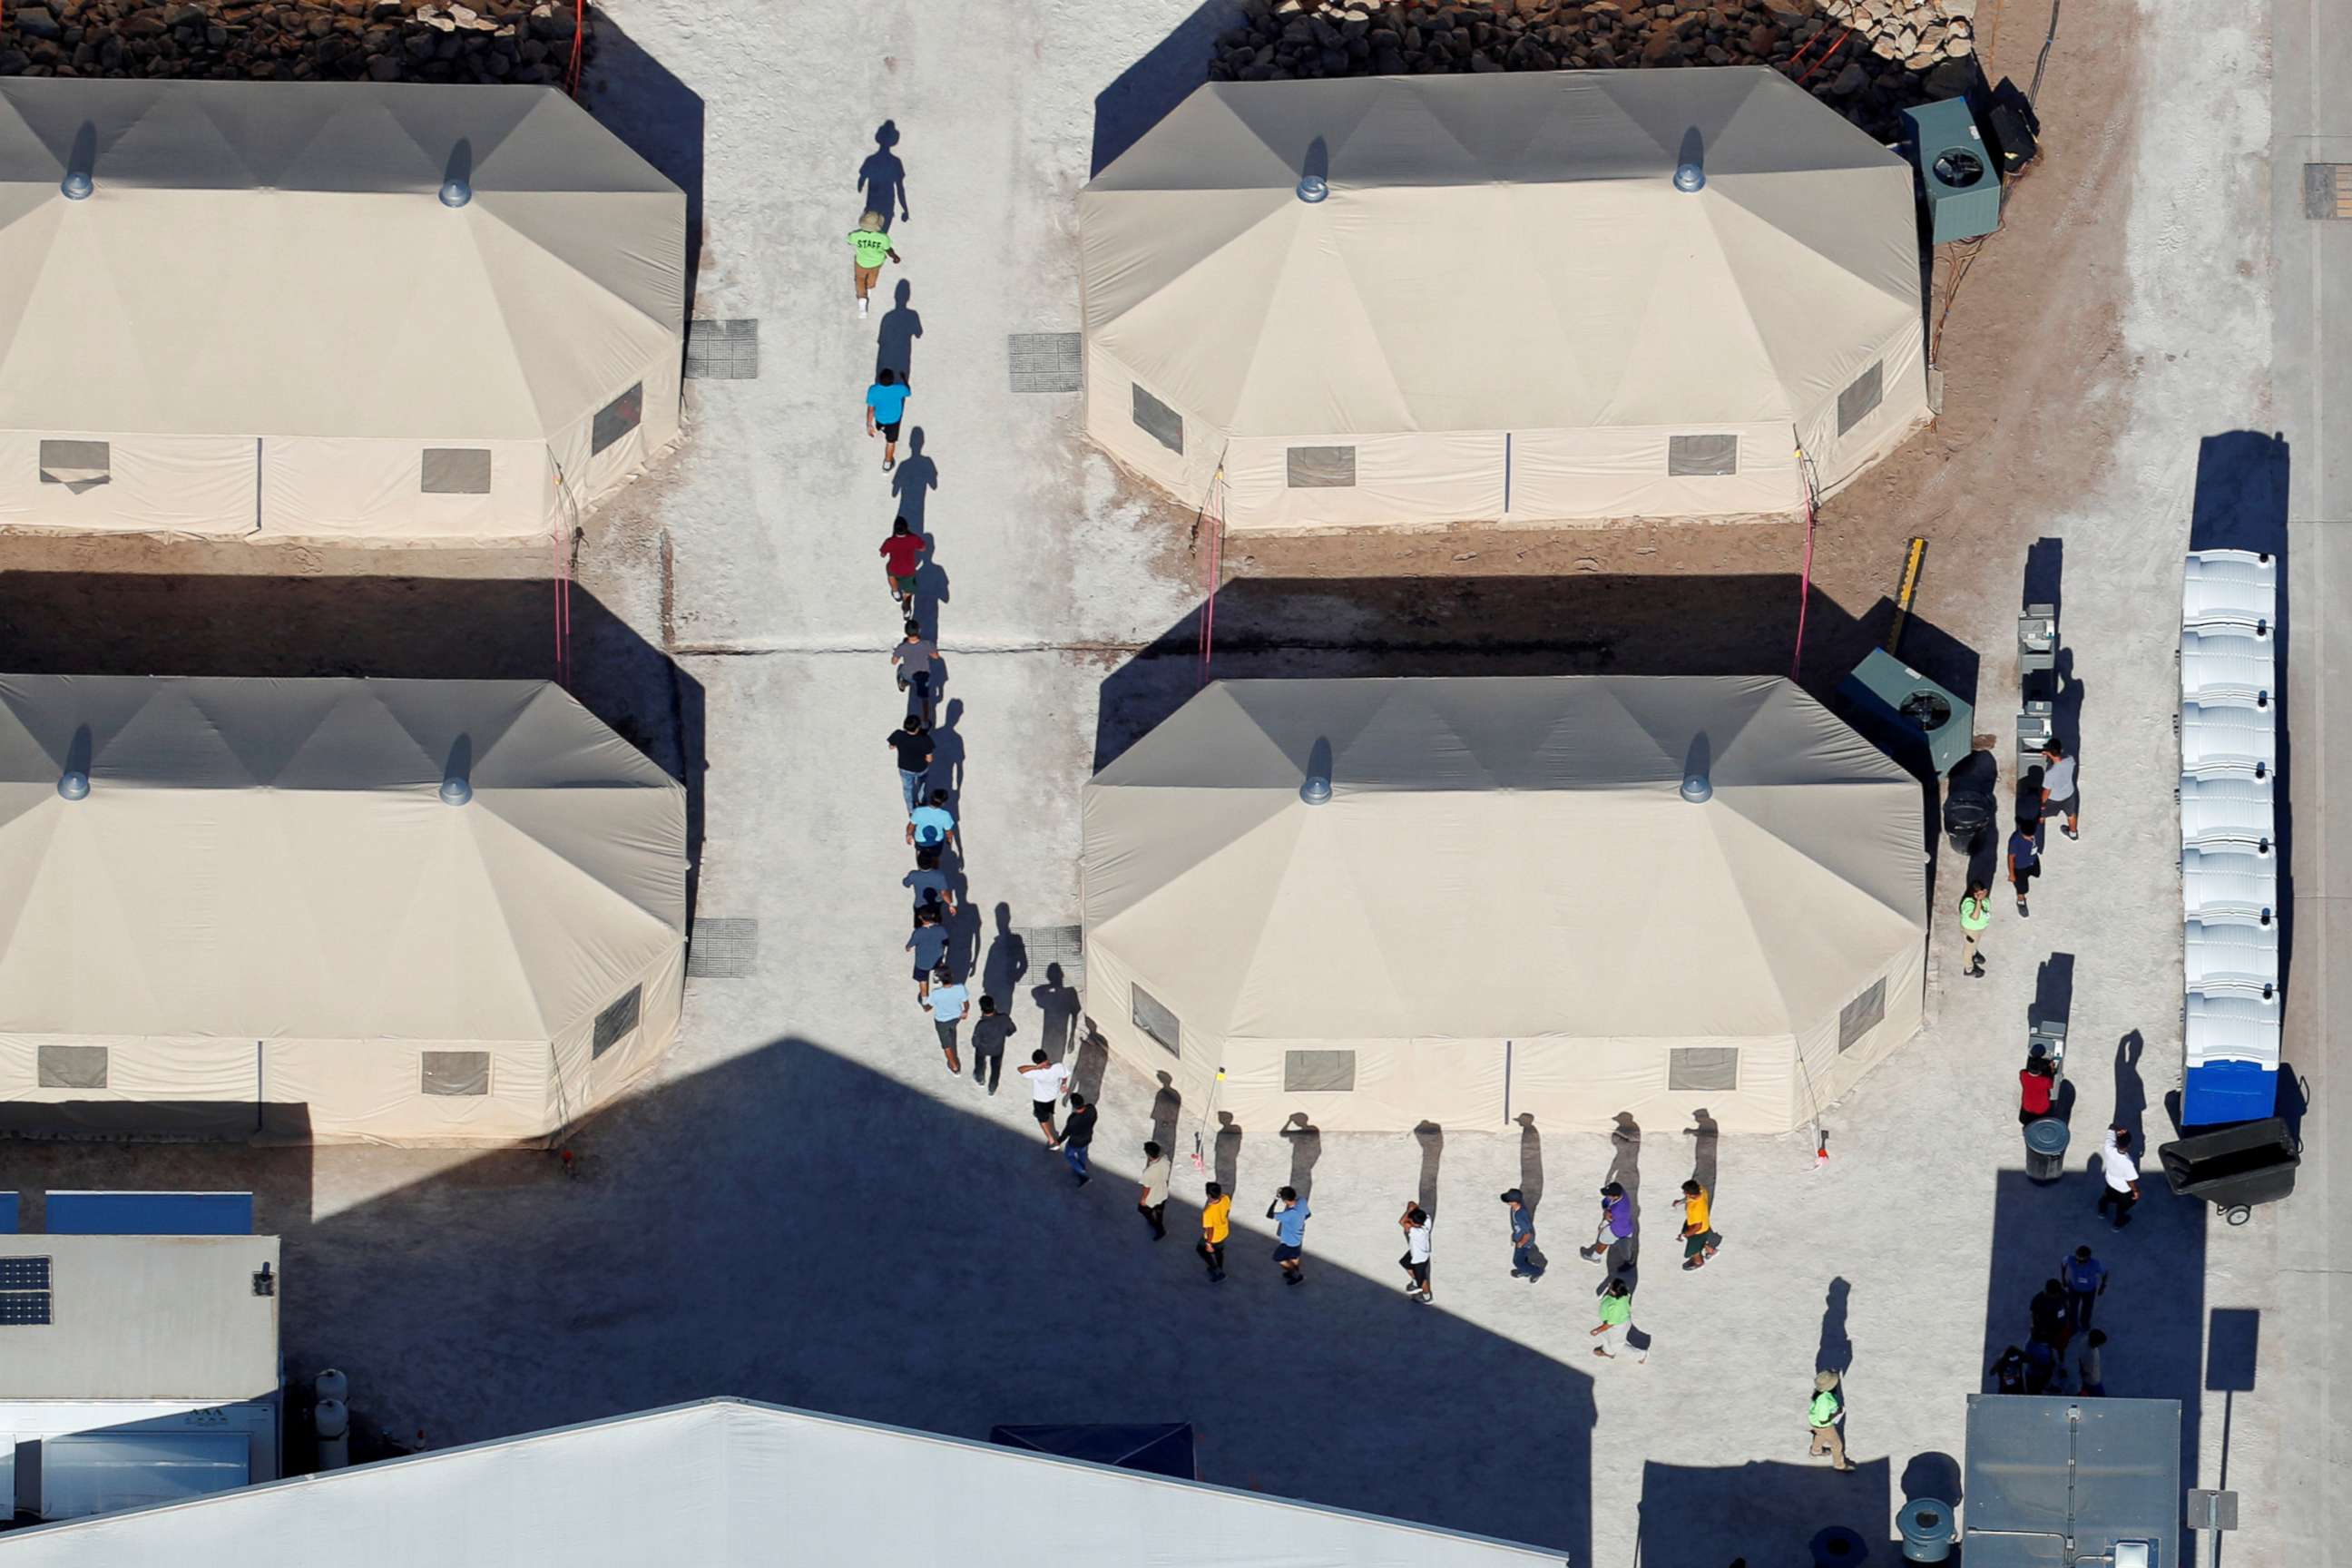 PHOTO: Immigrant children, many of whom have been separated from their parents, walk in a single file between tents in their compound next to the Mexican border in Tornillo, Texas, June 18, 2018.